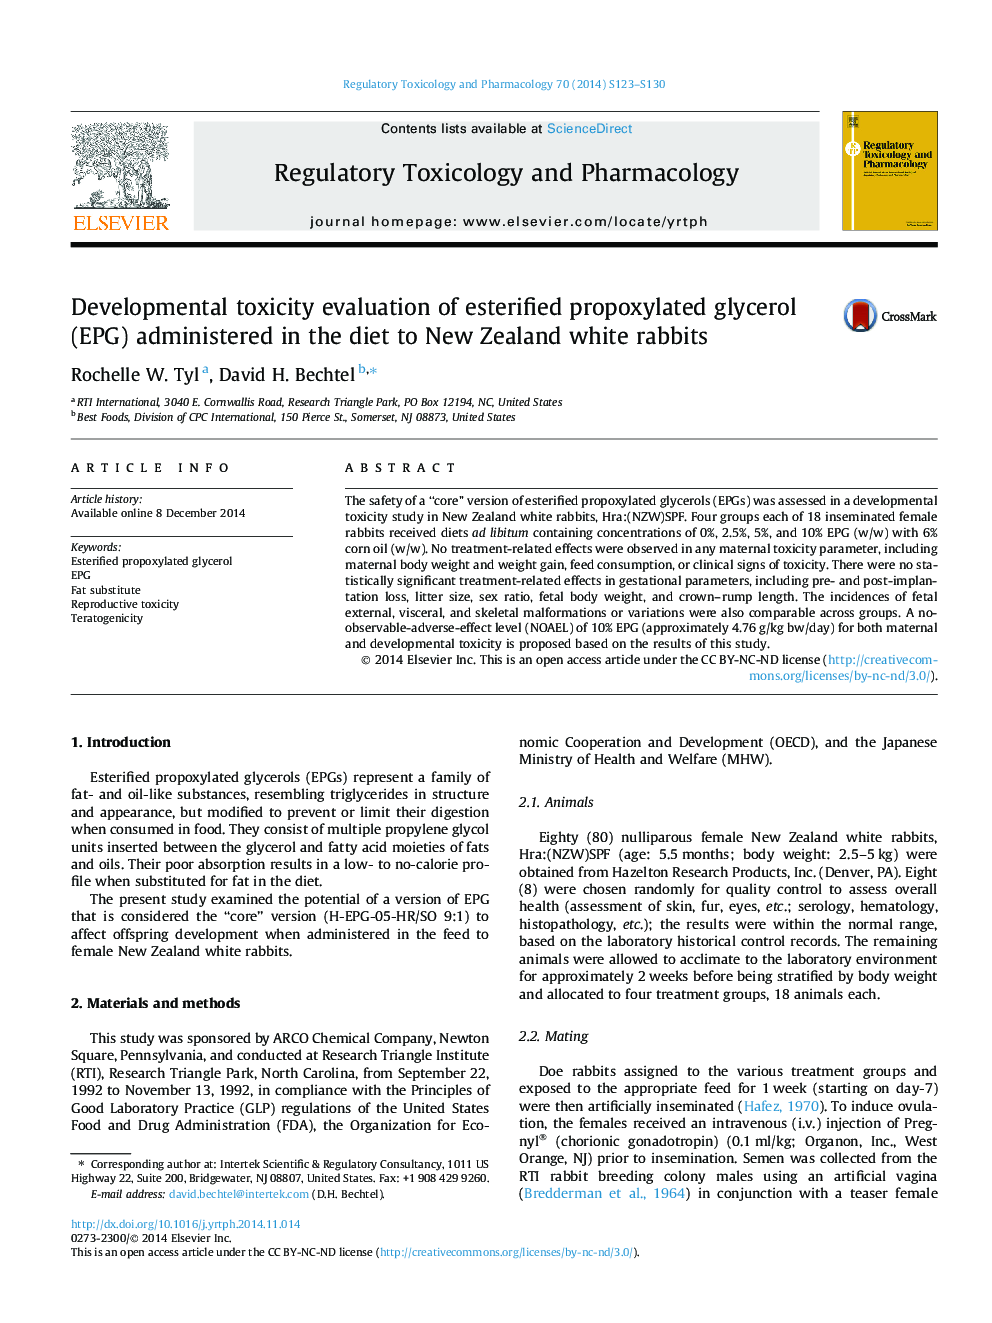 Developmental toxicity evaluation of esterified propoxylated glycerol (EPG) administered in the diet to New Zealand white rabbits